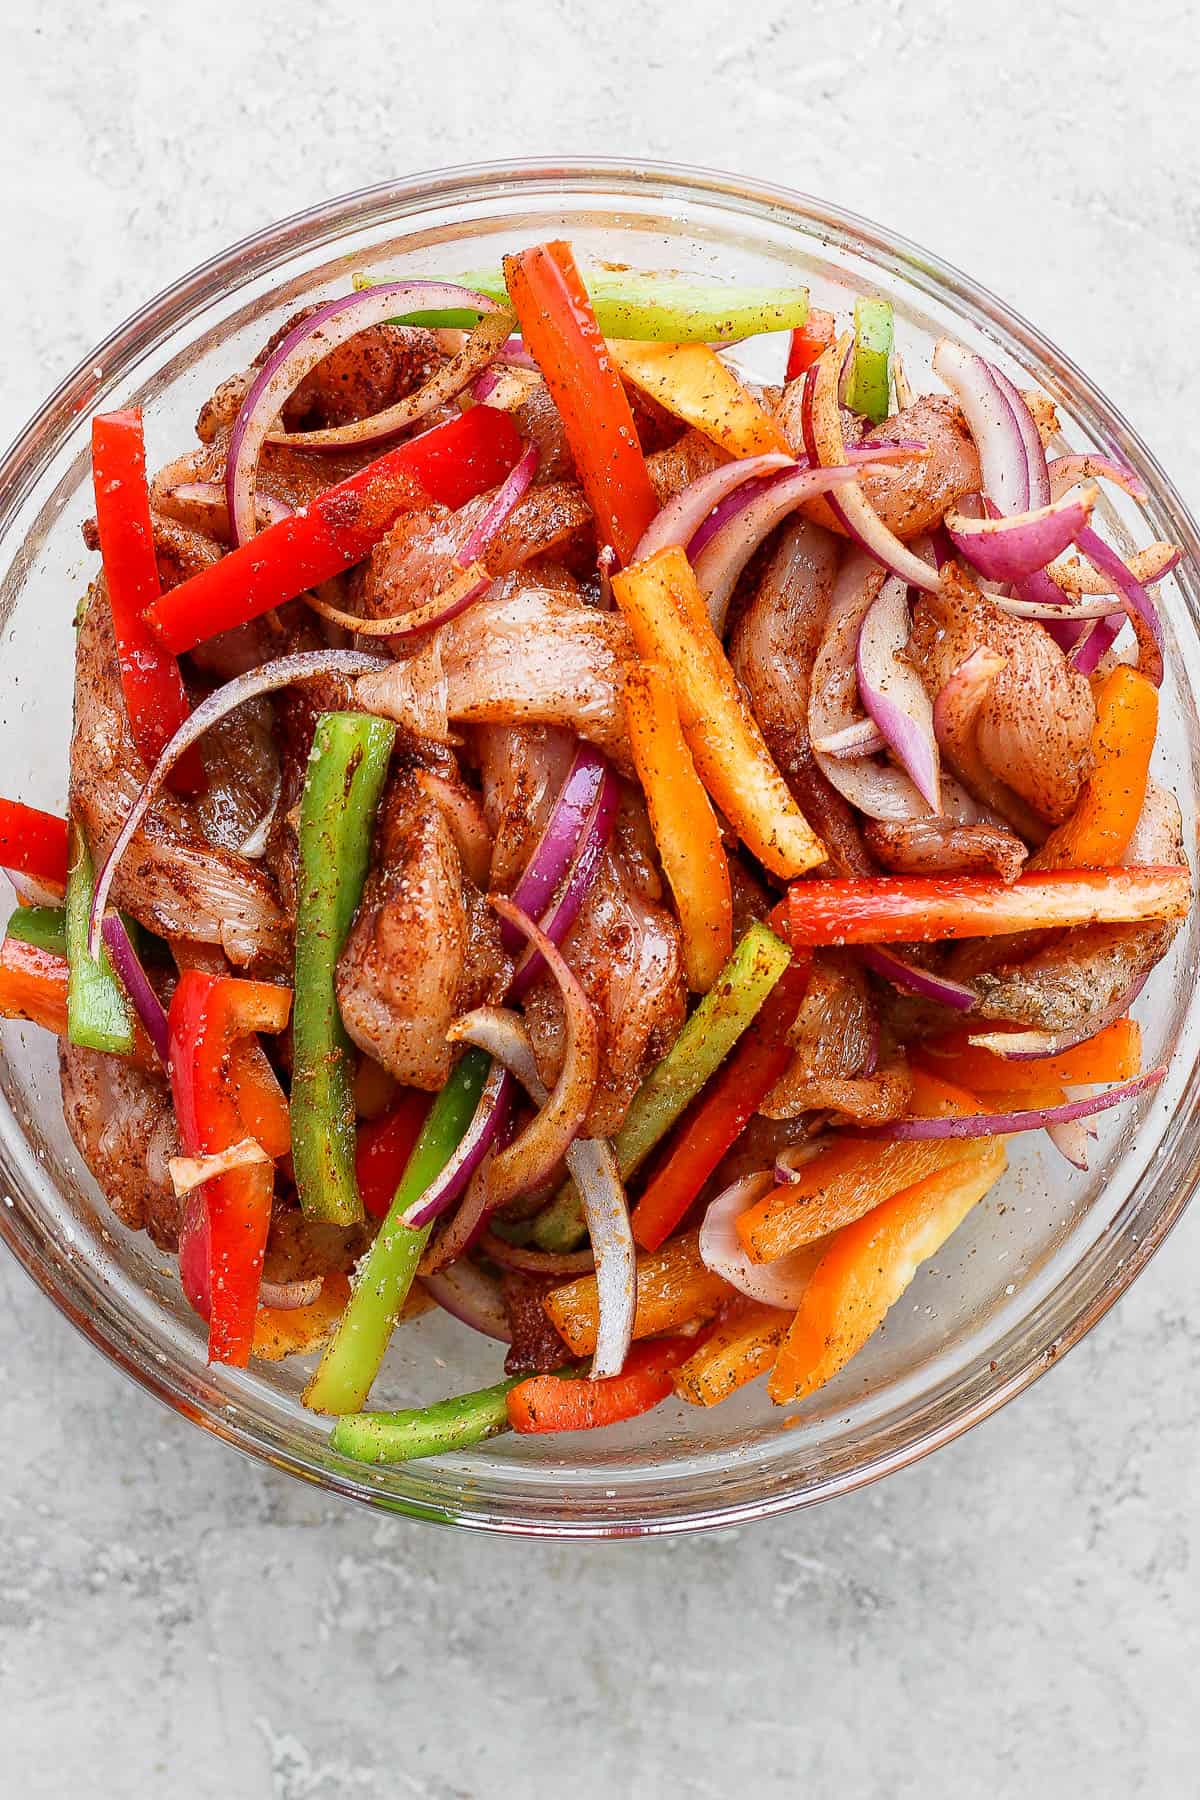 Chicken, vegetables, and seasoning mixed in a clear glass bowl for air fryer chicken fajitas